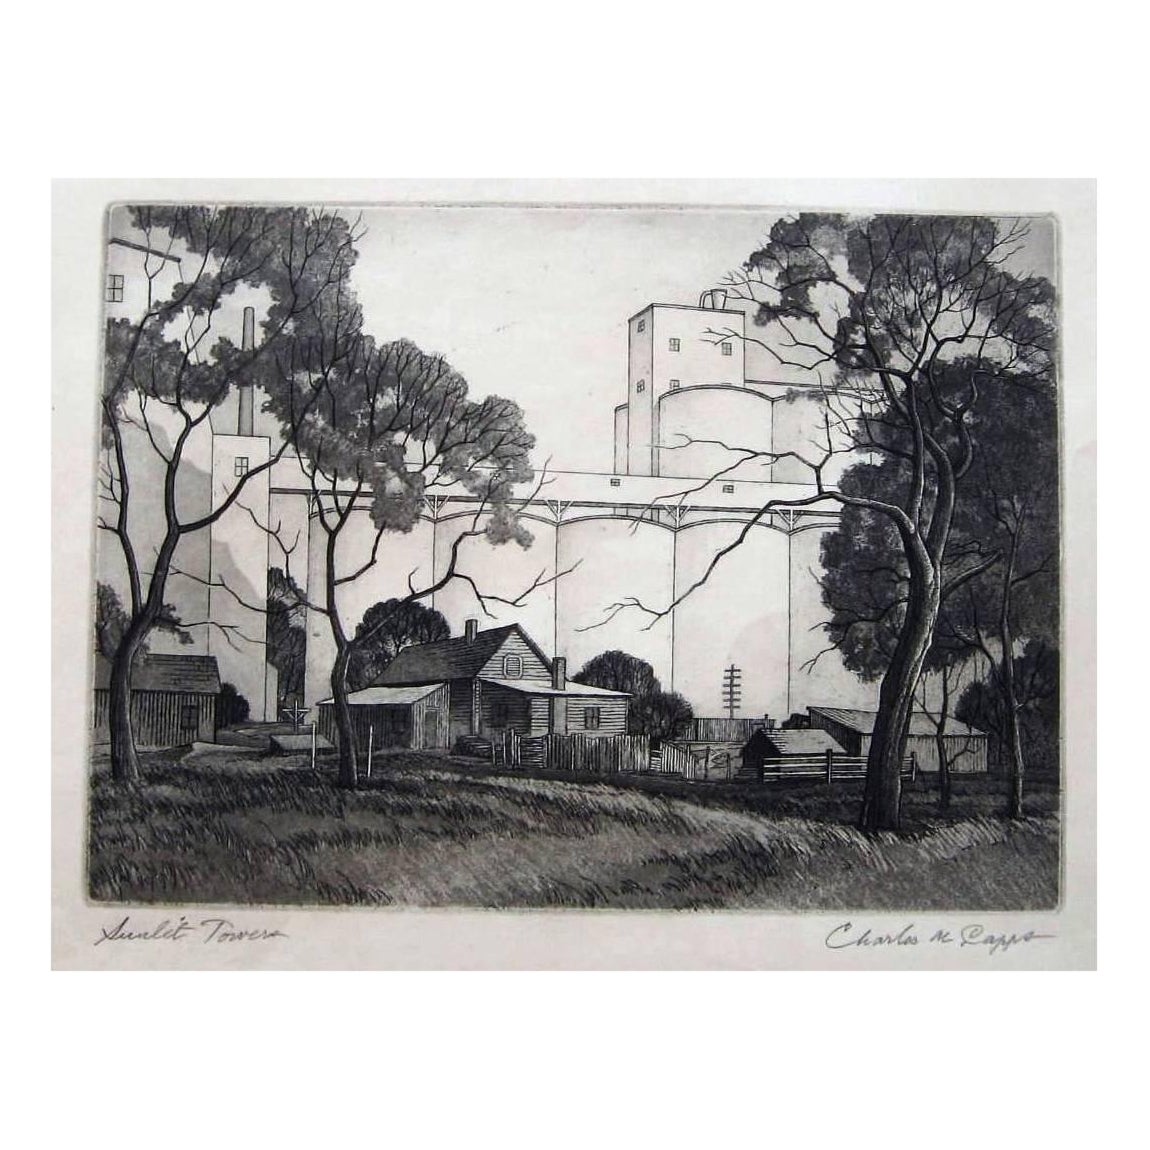 Charles Capps Original Pencil Signed Etching, 1954, "Sunlit Towers"